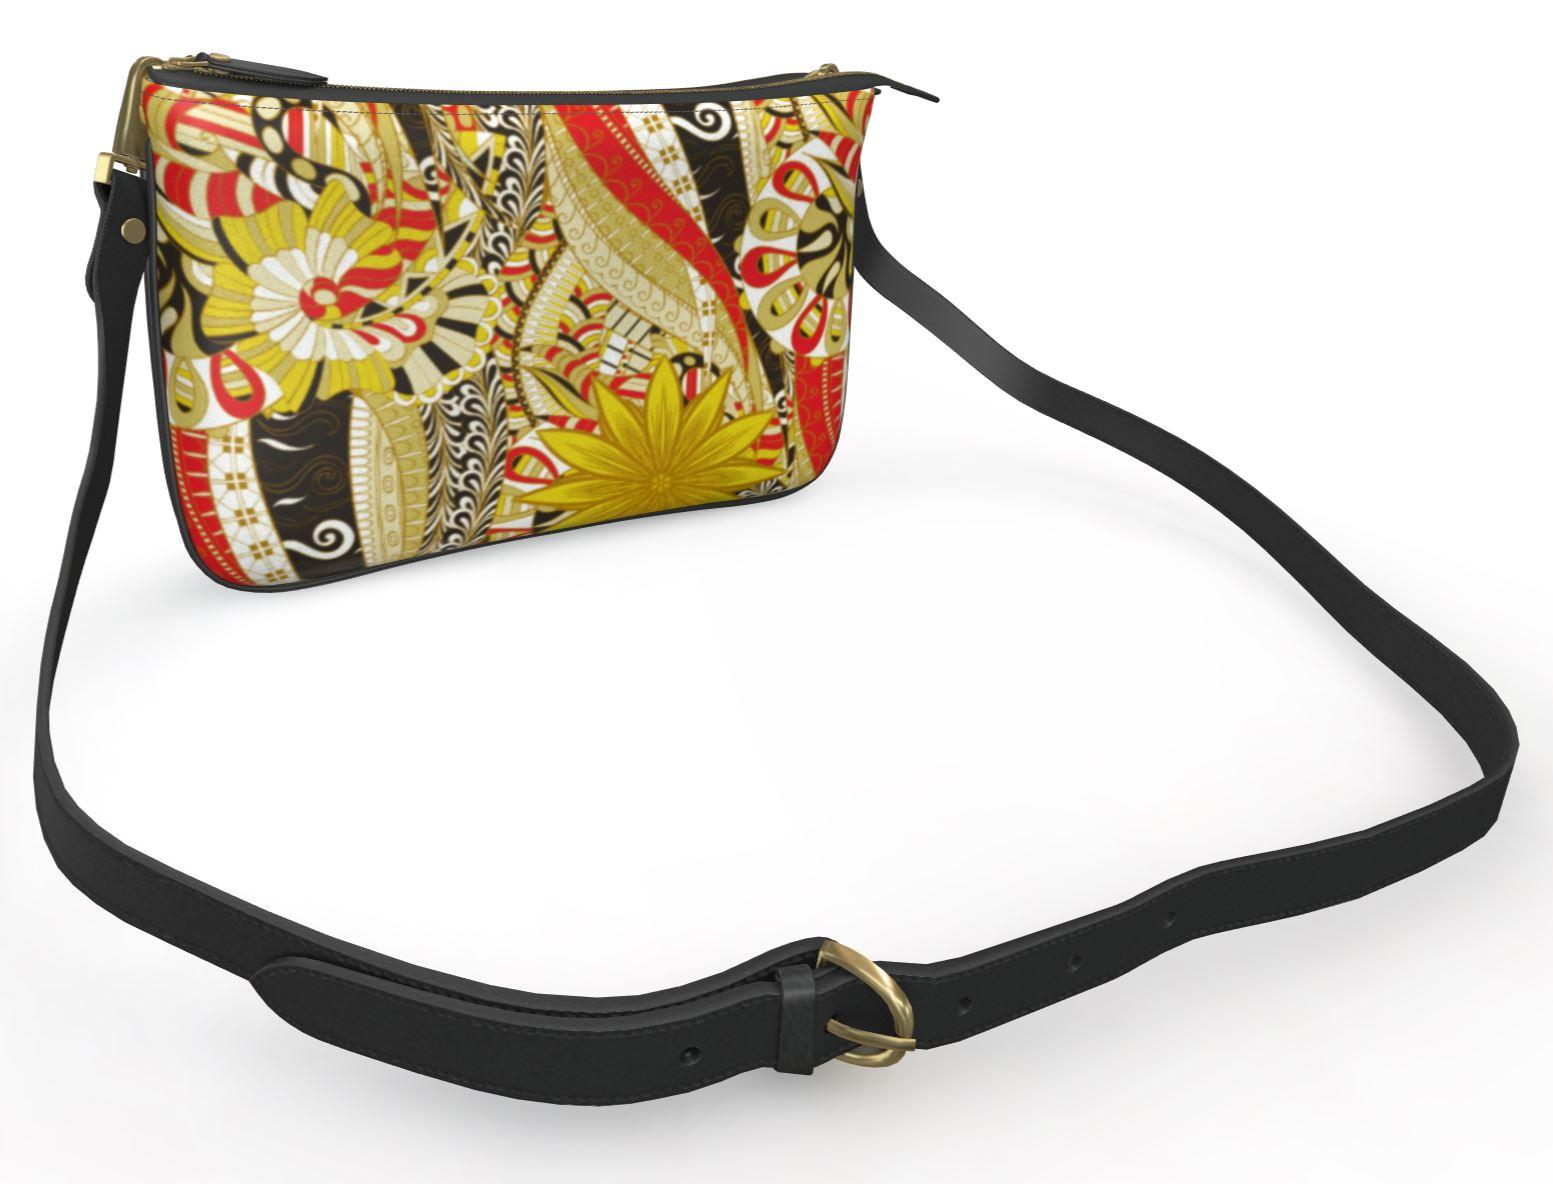 Merina Leather Pochette Bag - Baroque & Abstract Floral Print | Blissfully Brand